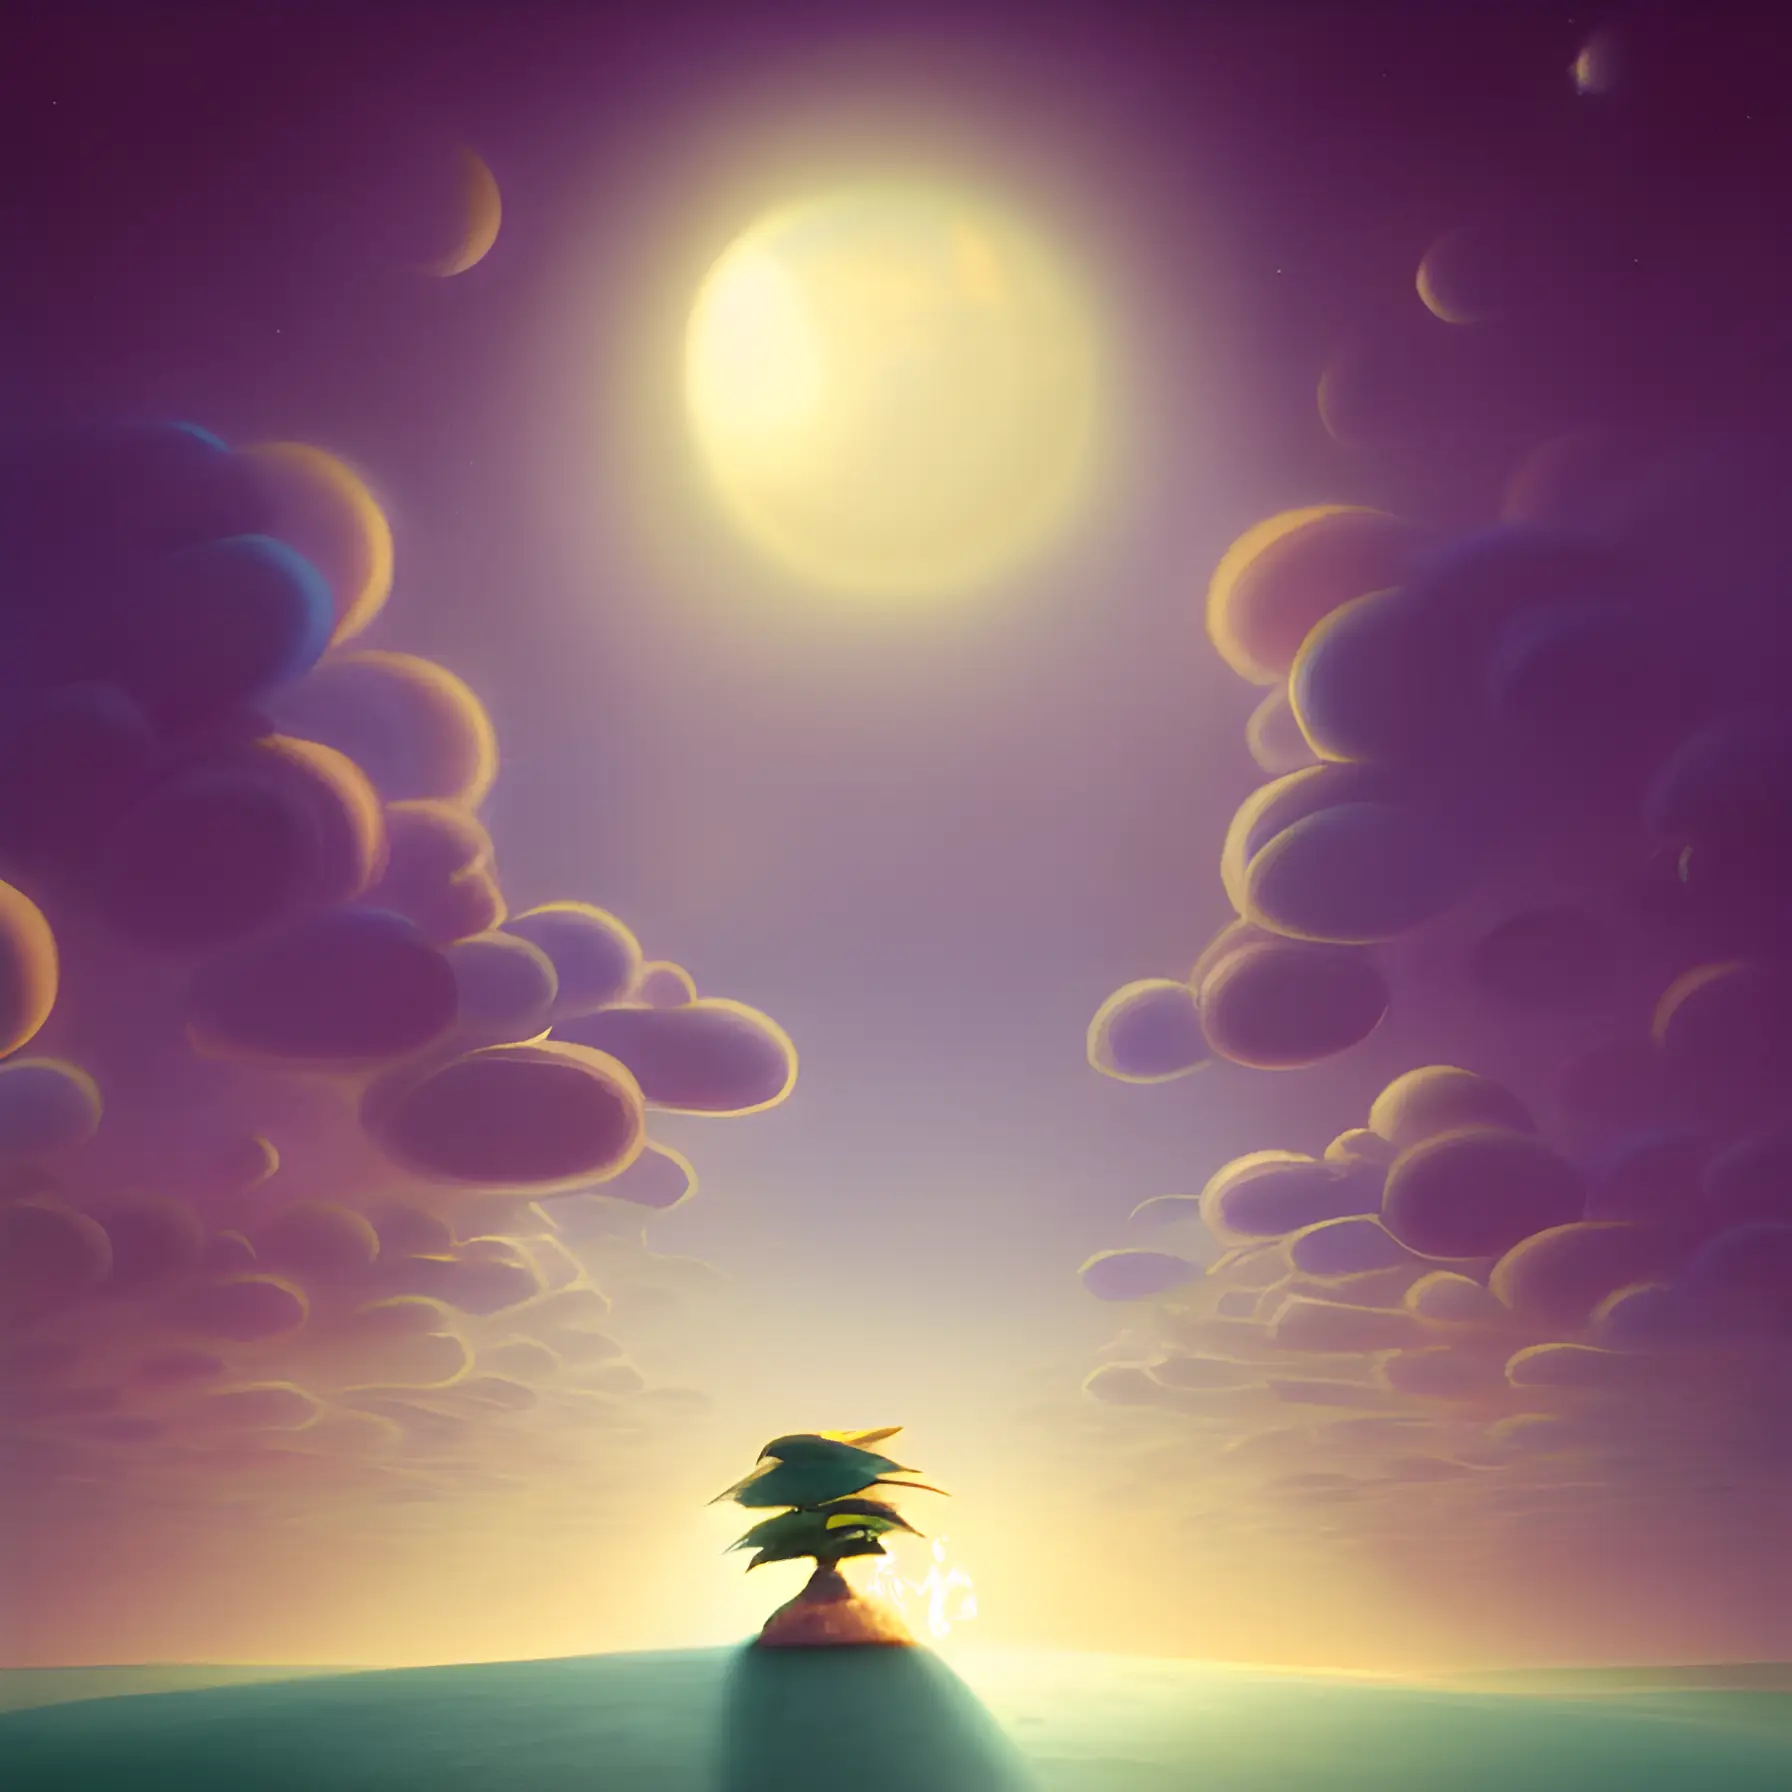 A small island with a lone palm tree sits in the middle of the ocean bathed in moonlight.